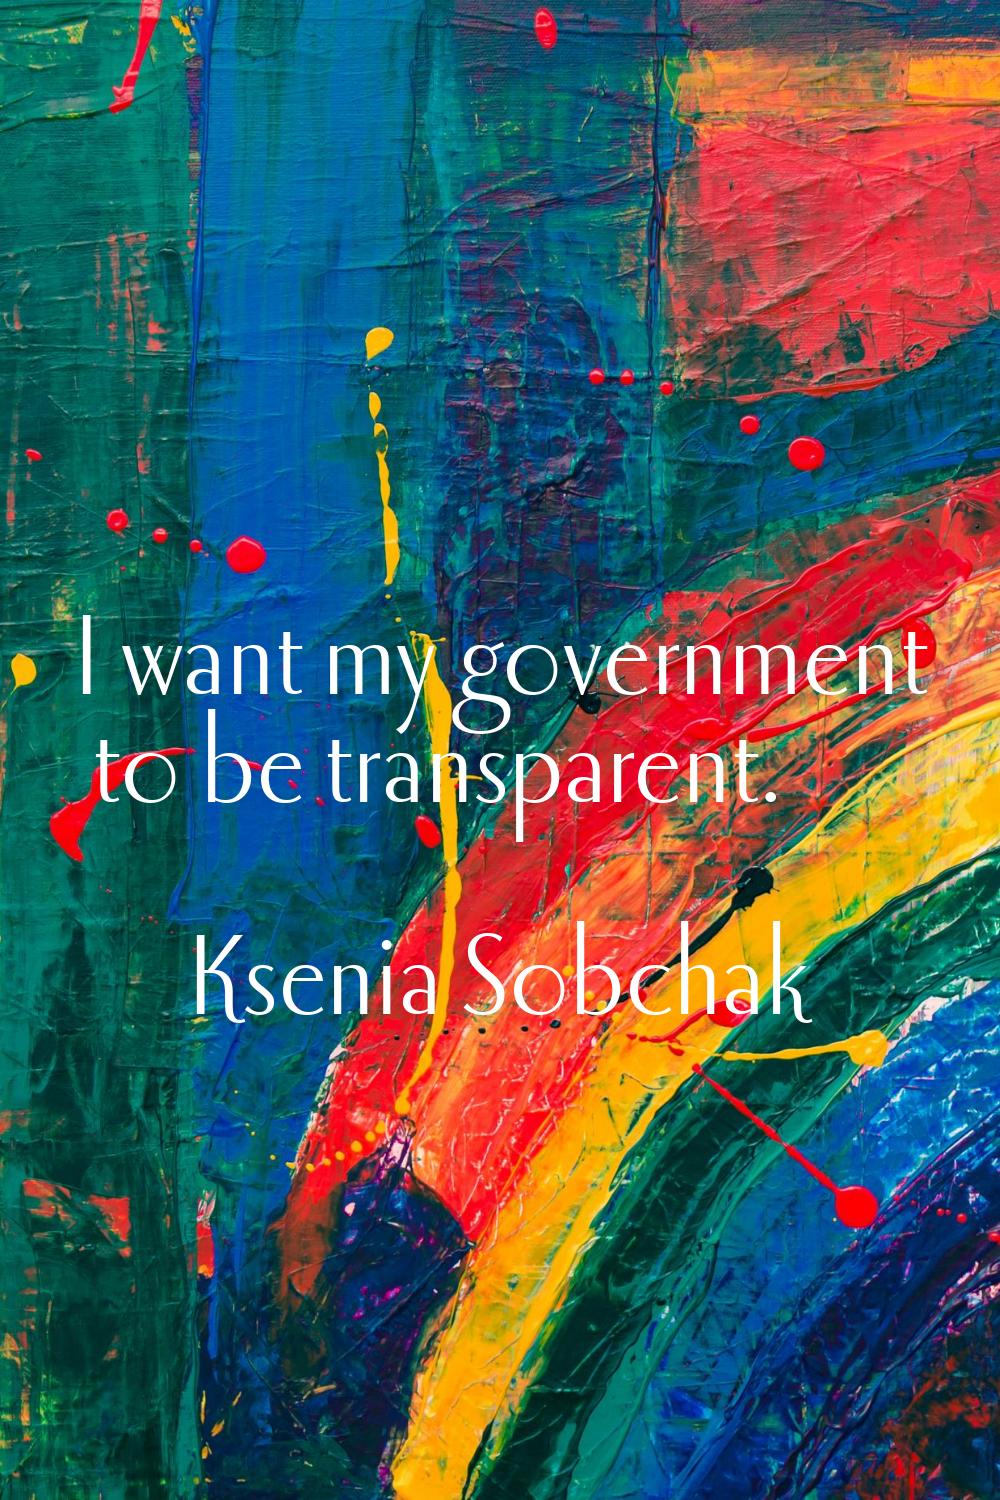 I want my government to be transparent.